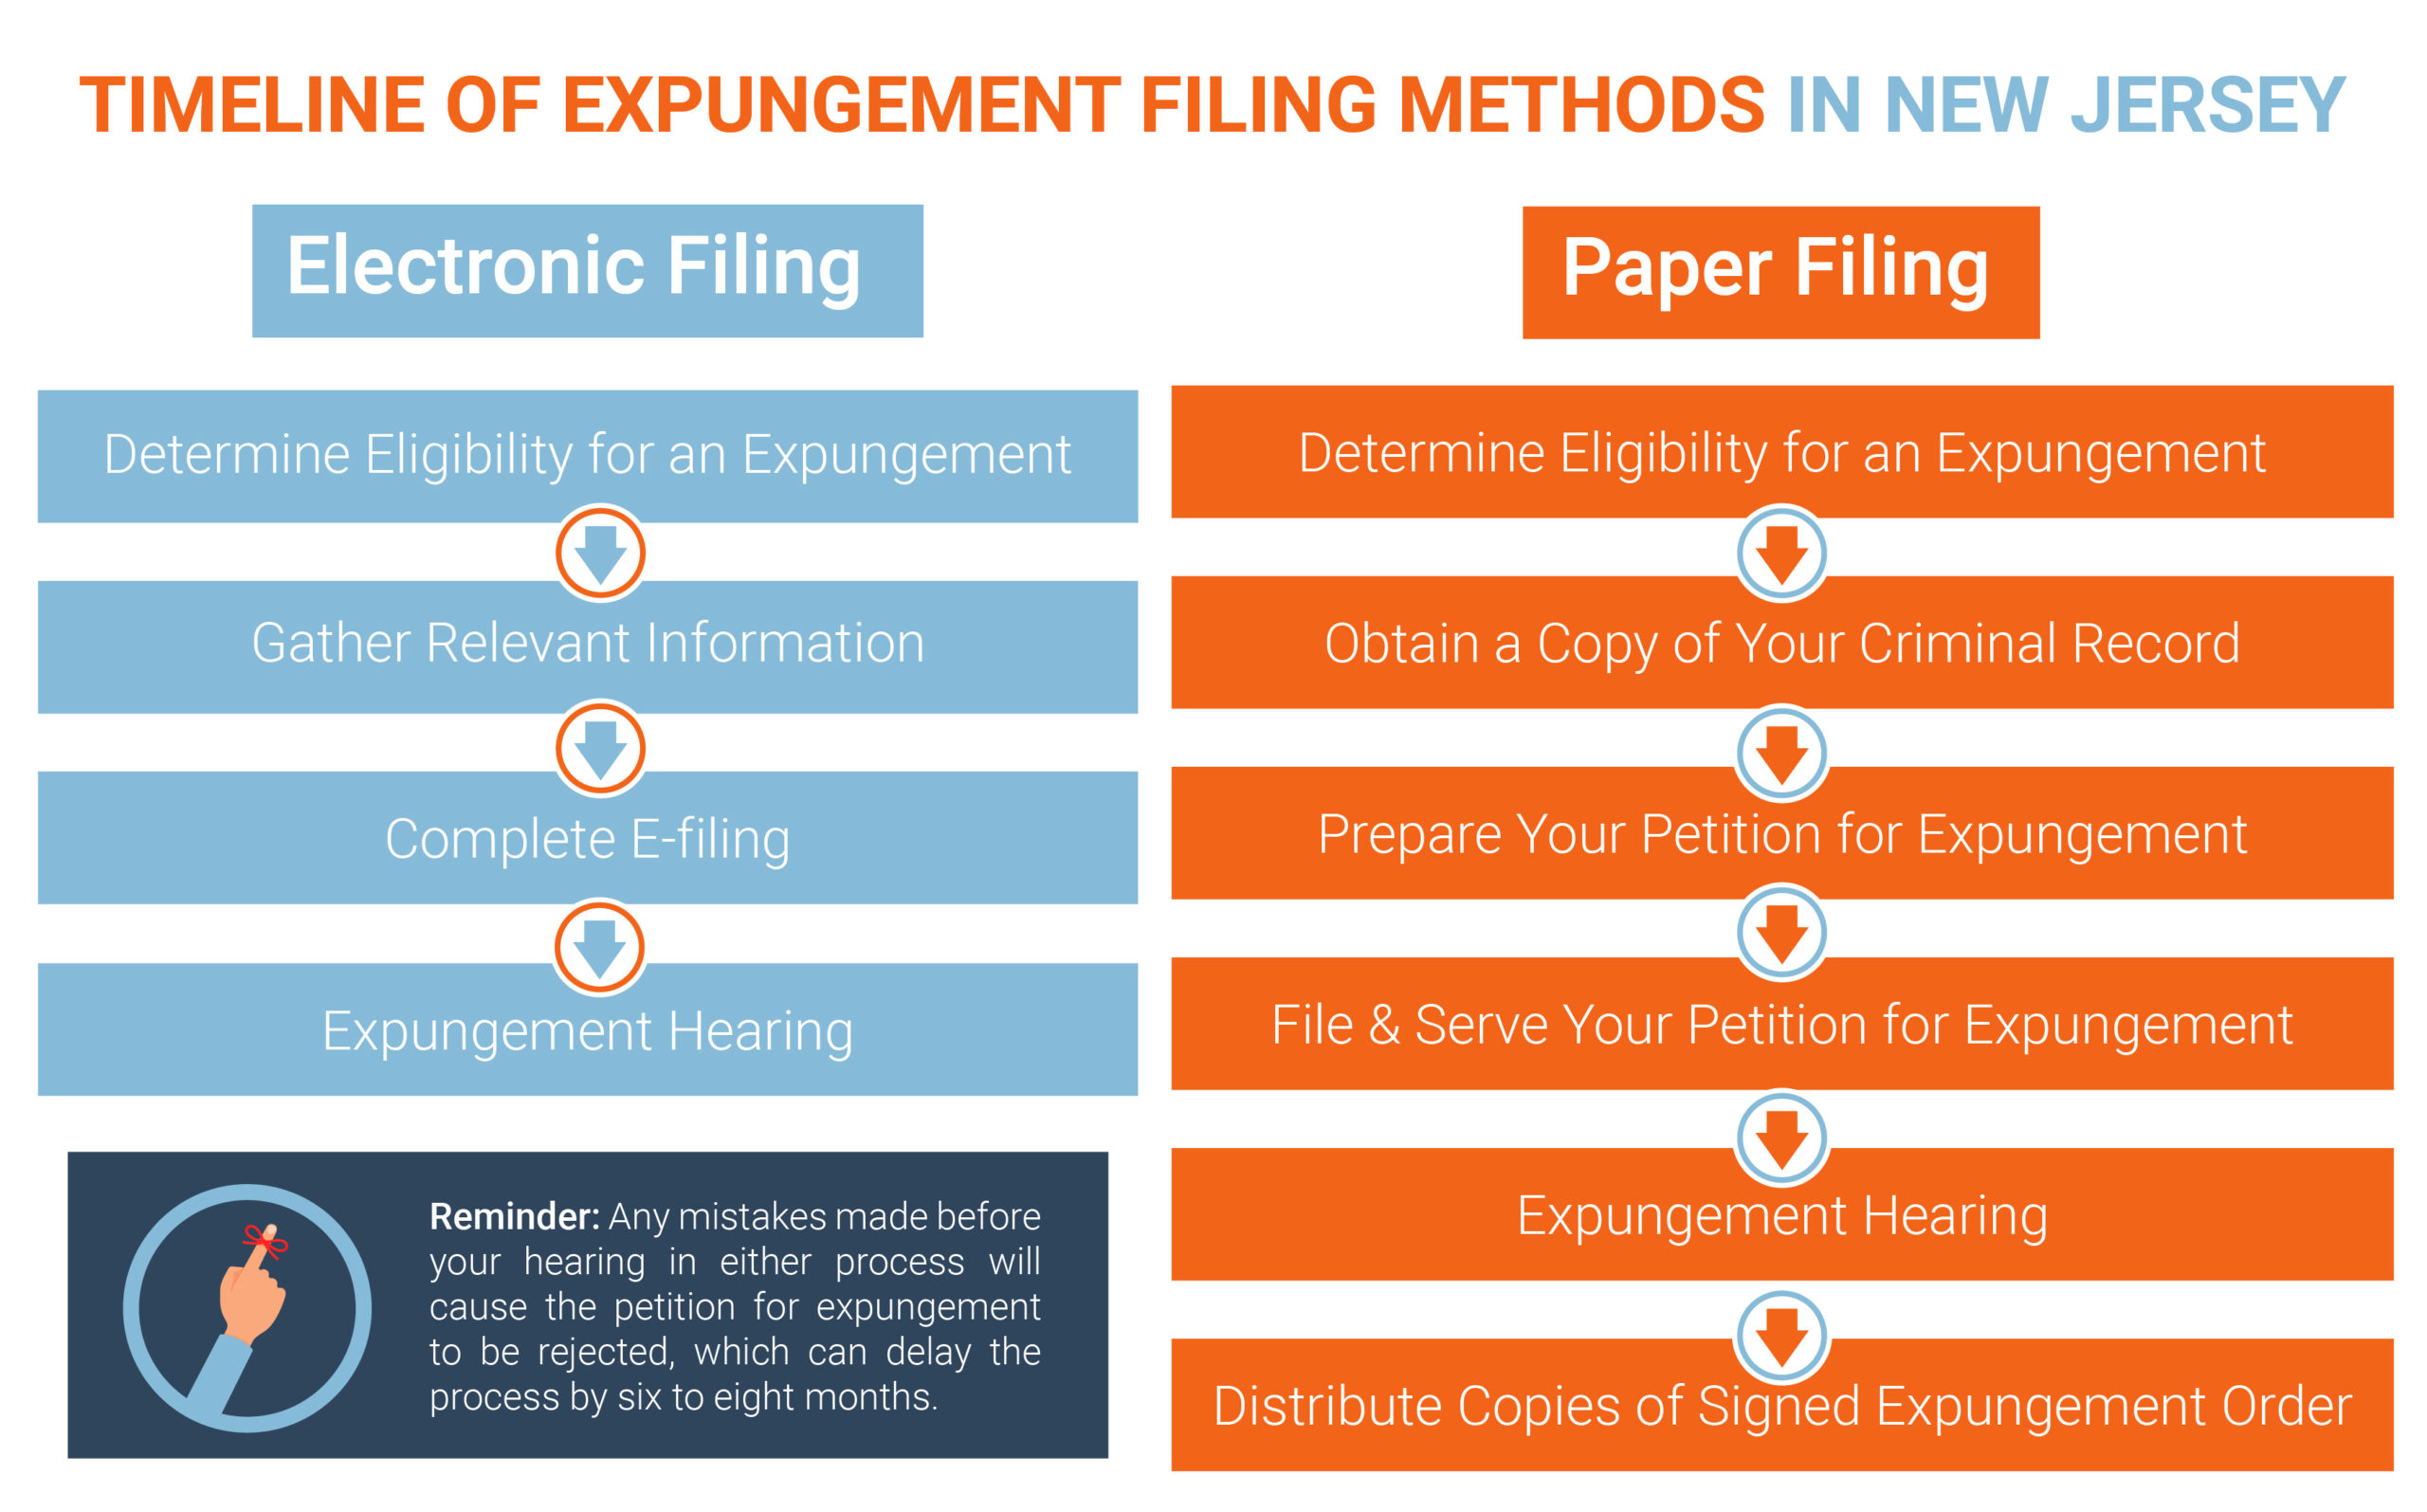 How to File for an Expungement in New Jersey